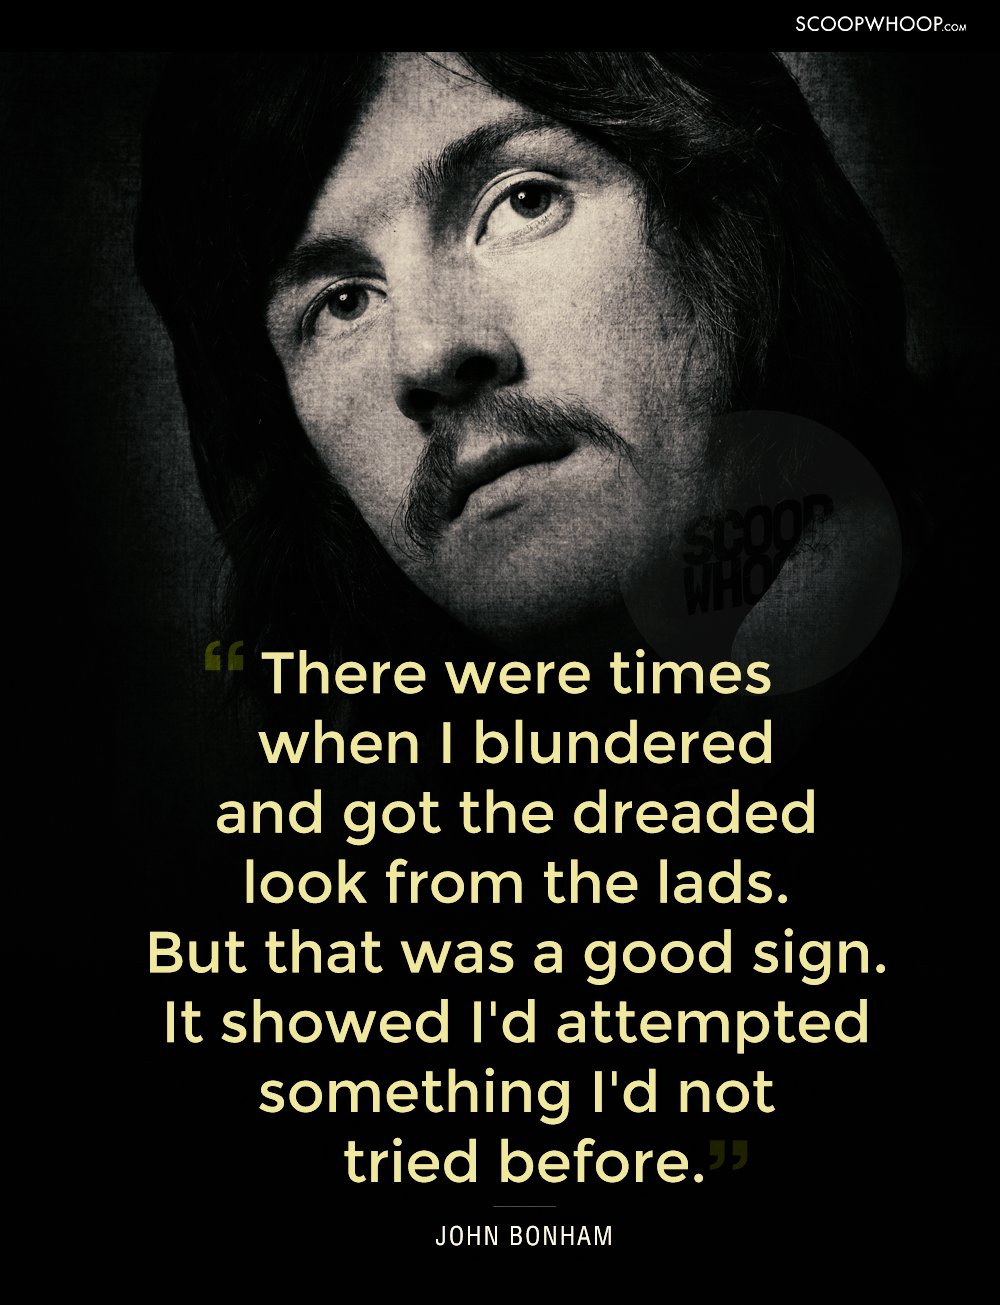 Inspirational Quotes Famous Musicians
 15 Profound Quotes By Famous Musicians About Work Love